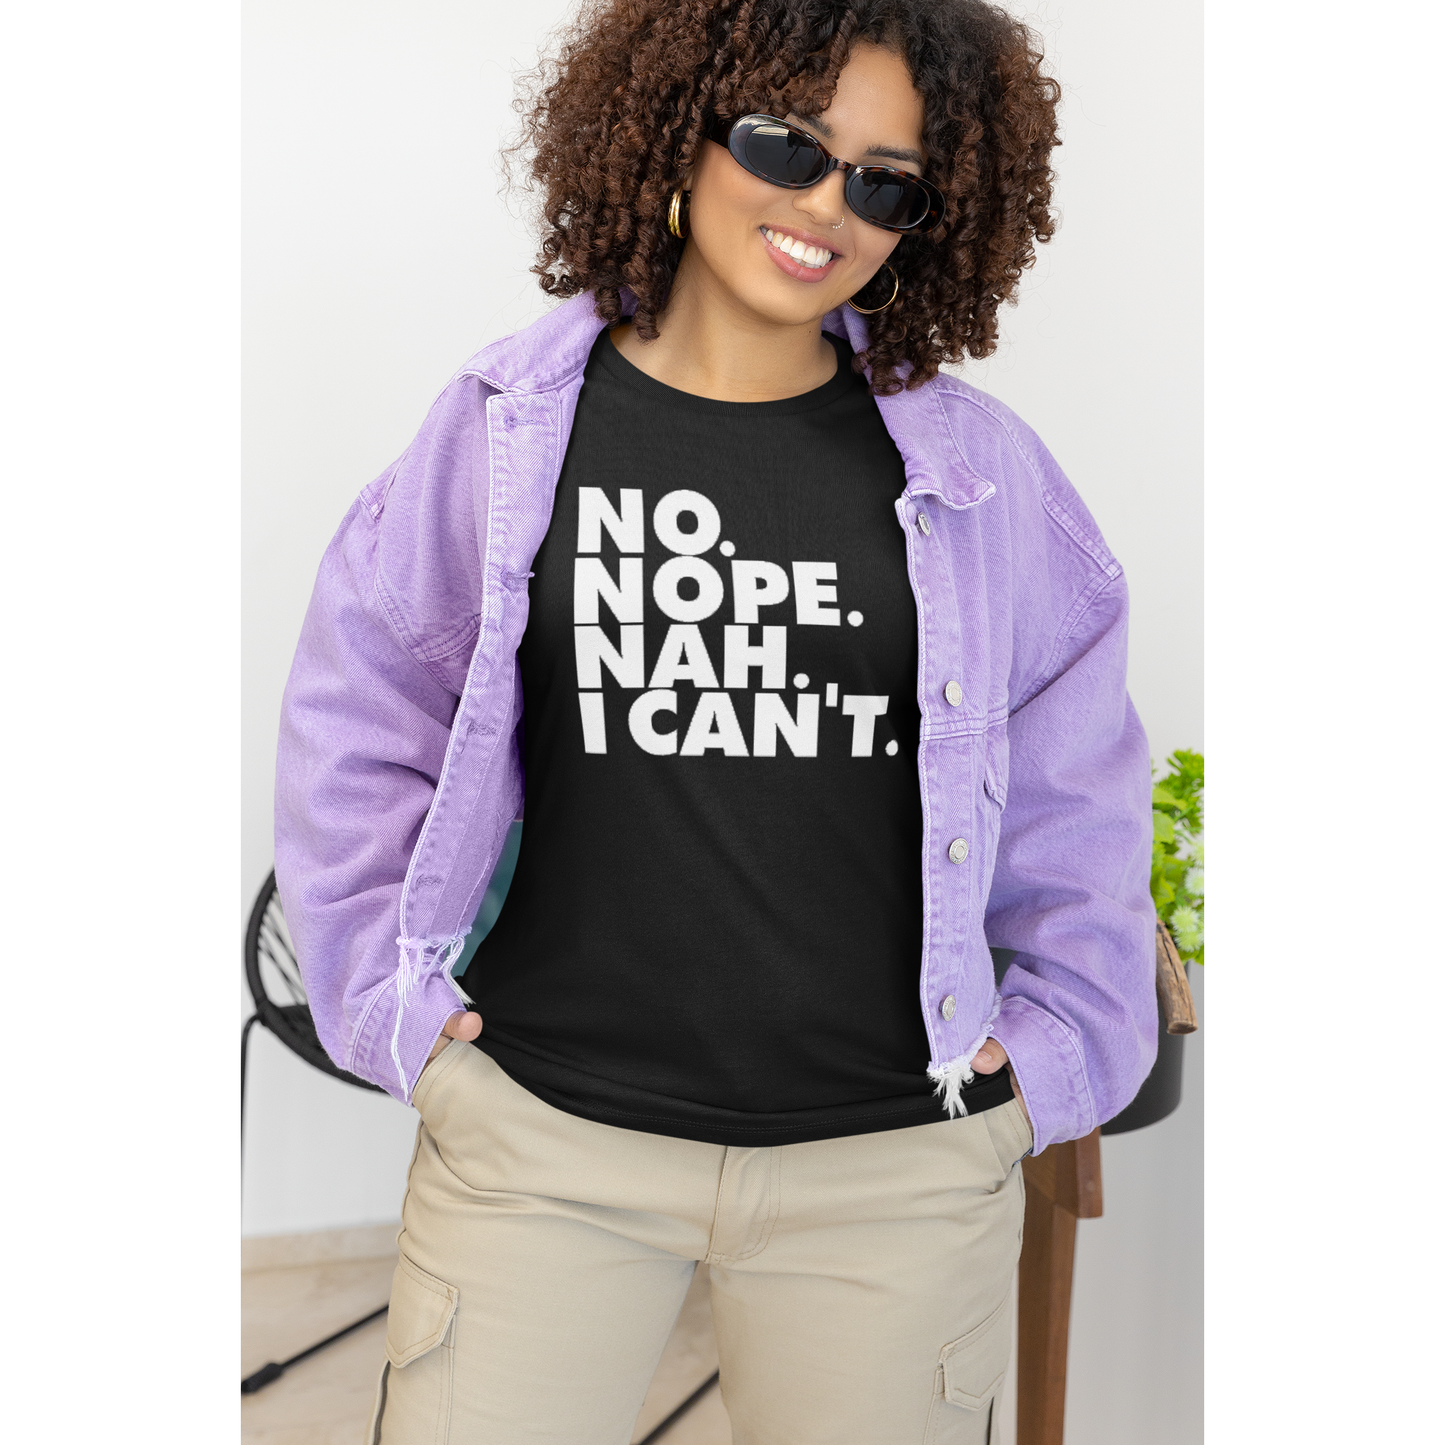 Say It How You Need - Short Sleeve T-Shirt